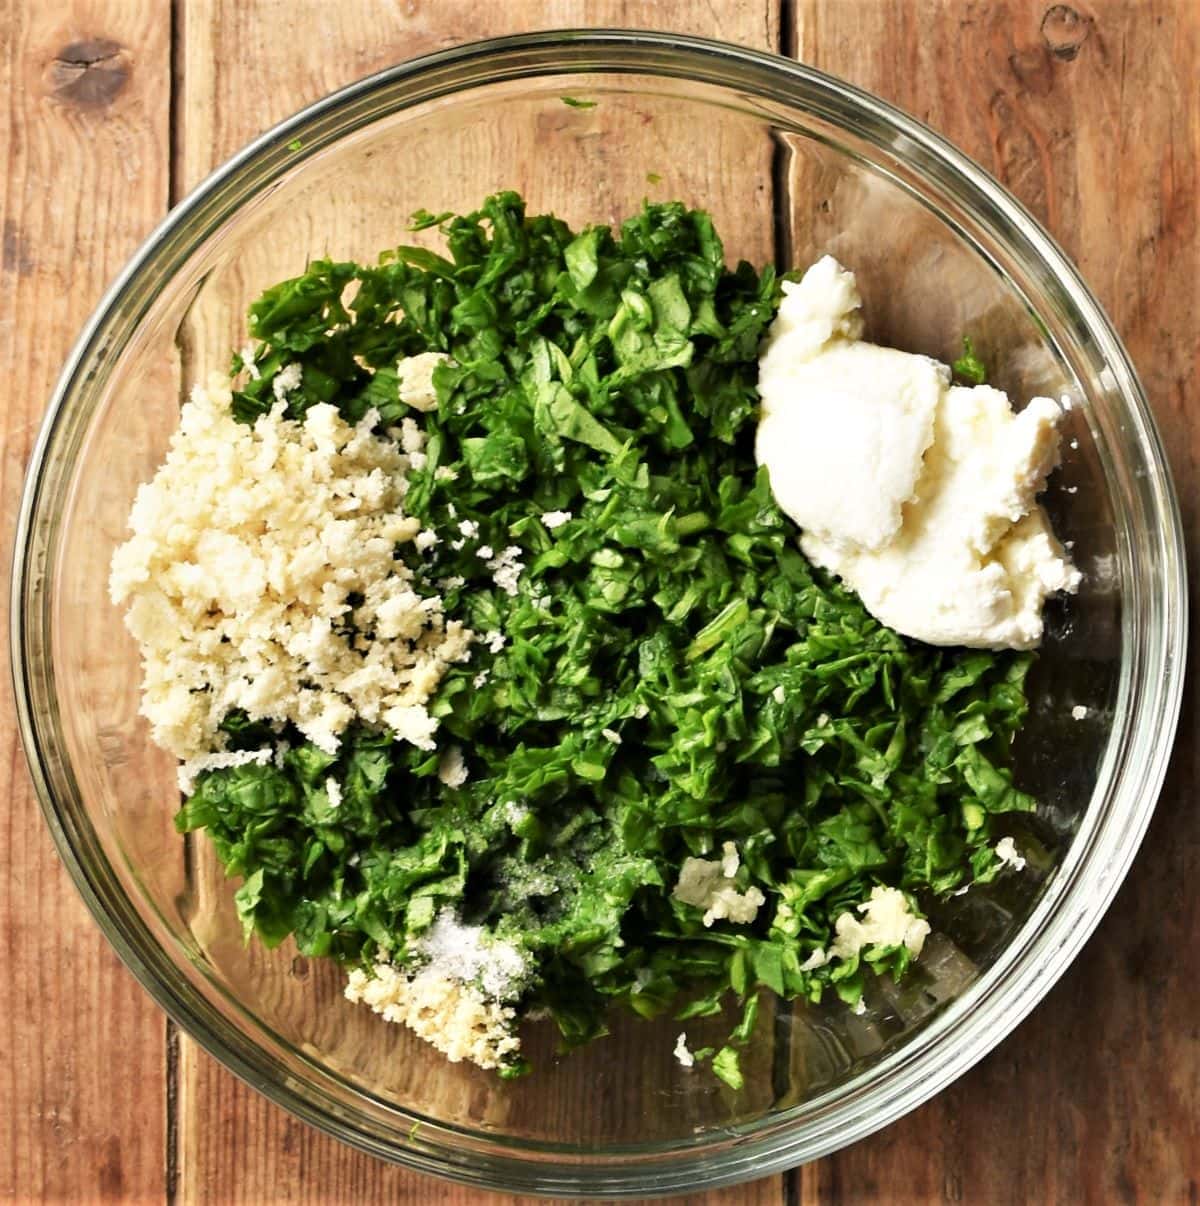 Spinach mixture with cheese and panko in mixing bowl.